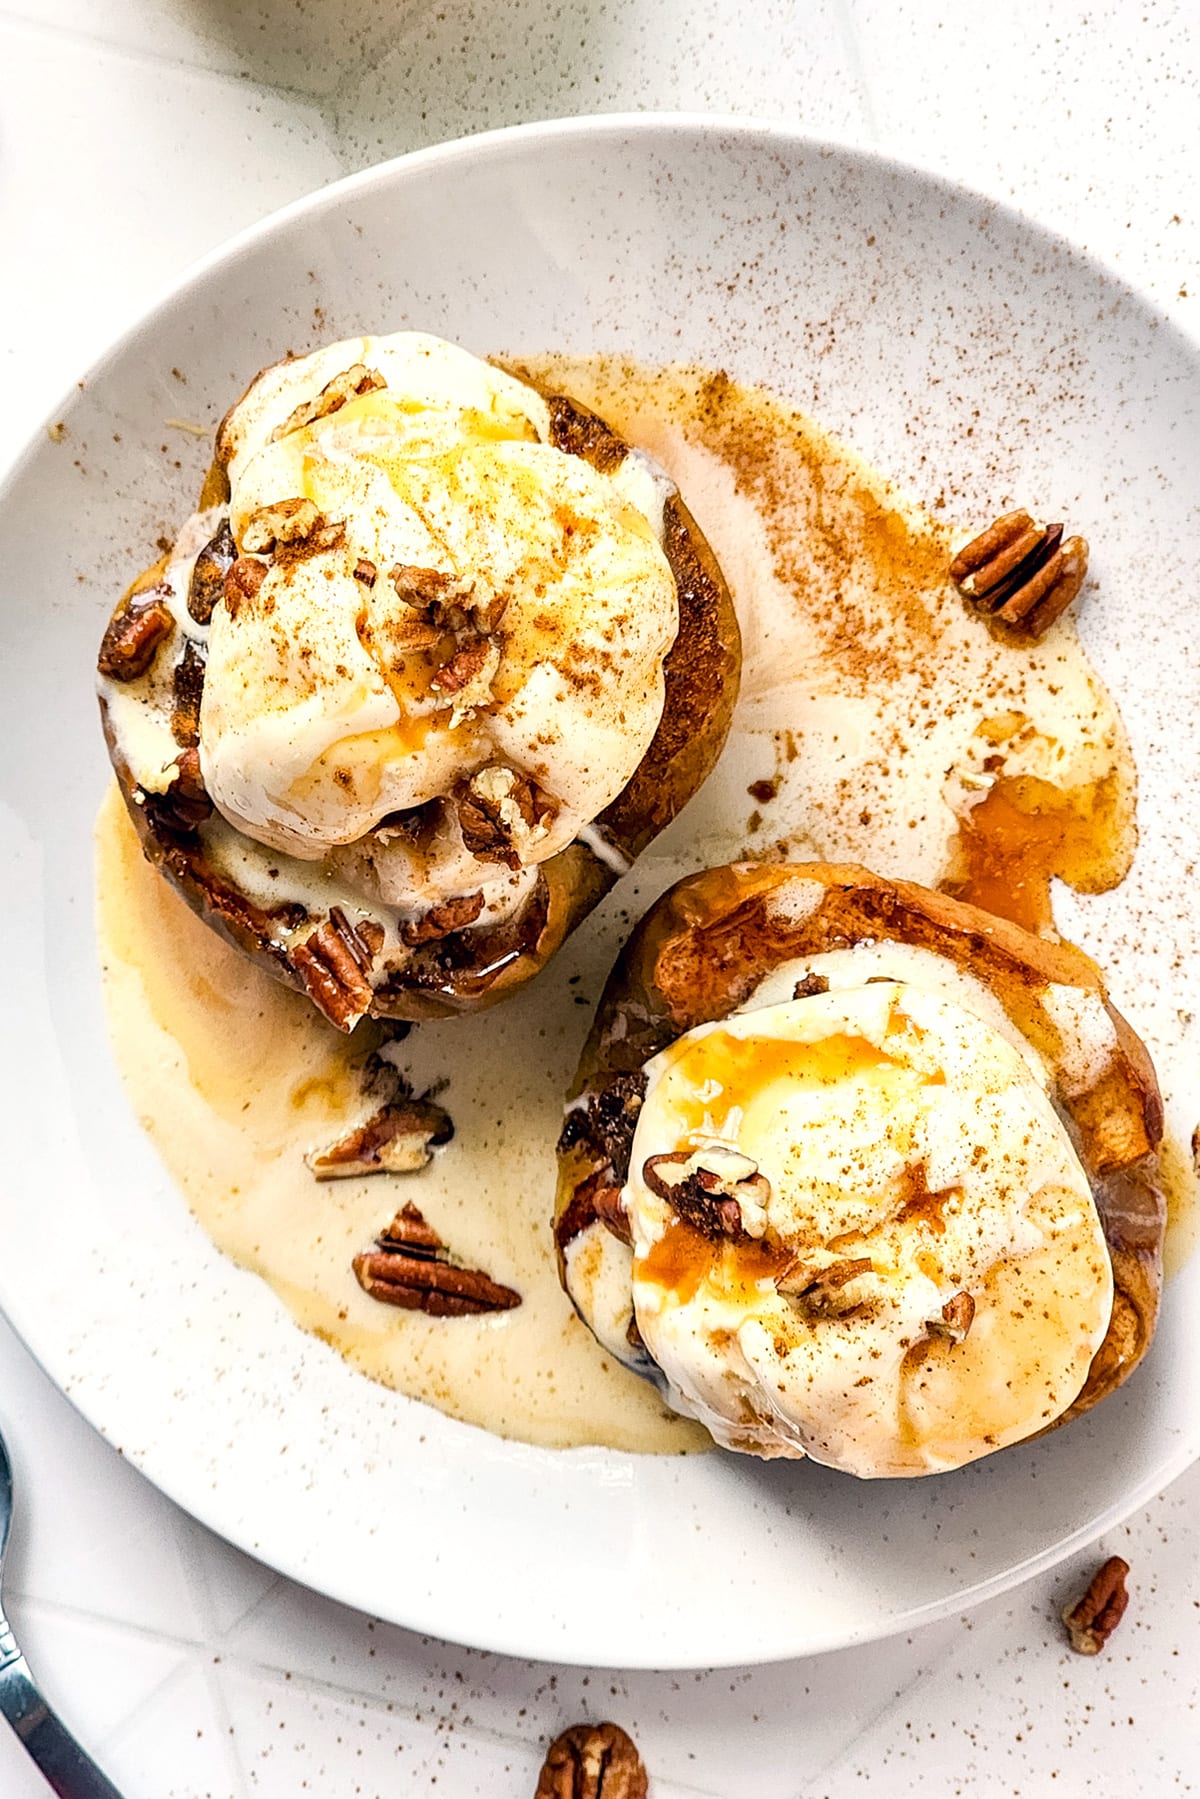 baked cinnamon apples with ice cream on top.